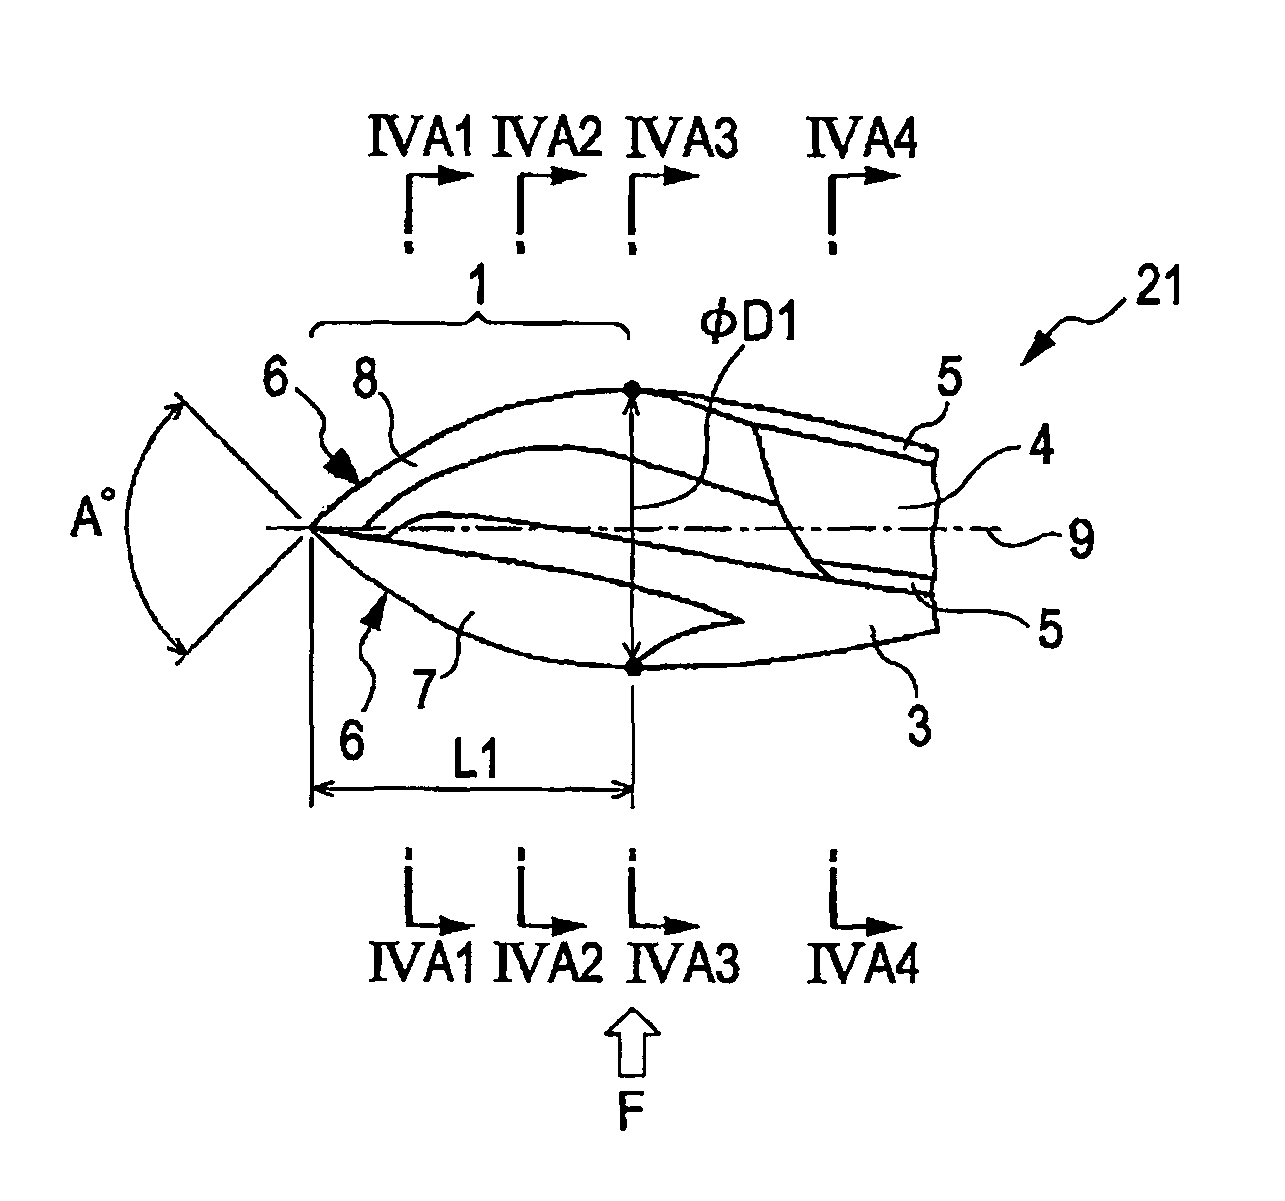 Drill and drilling method for workpiece